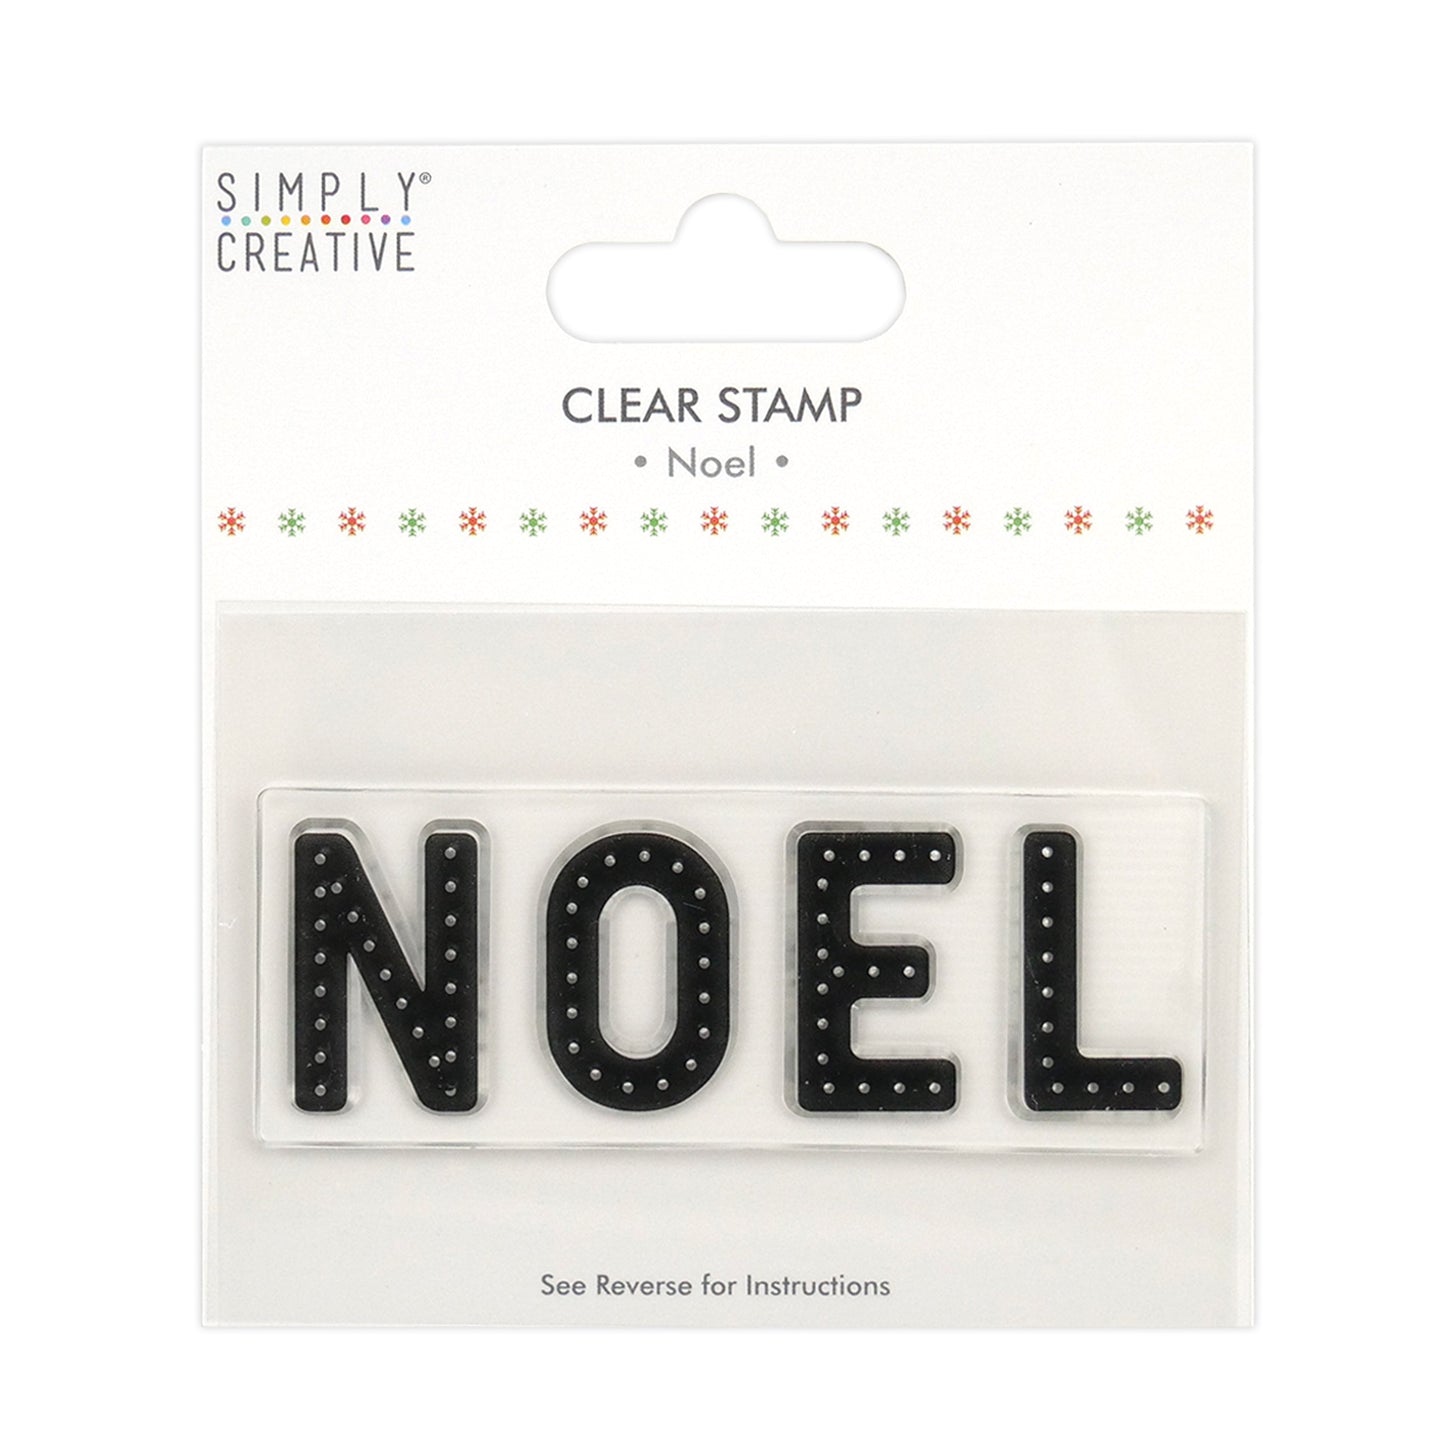 Simply Creative Clear Christmas Stamp Noel Large